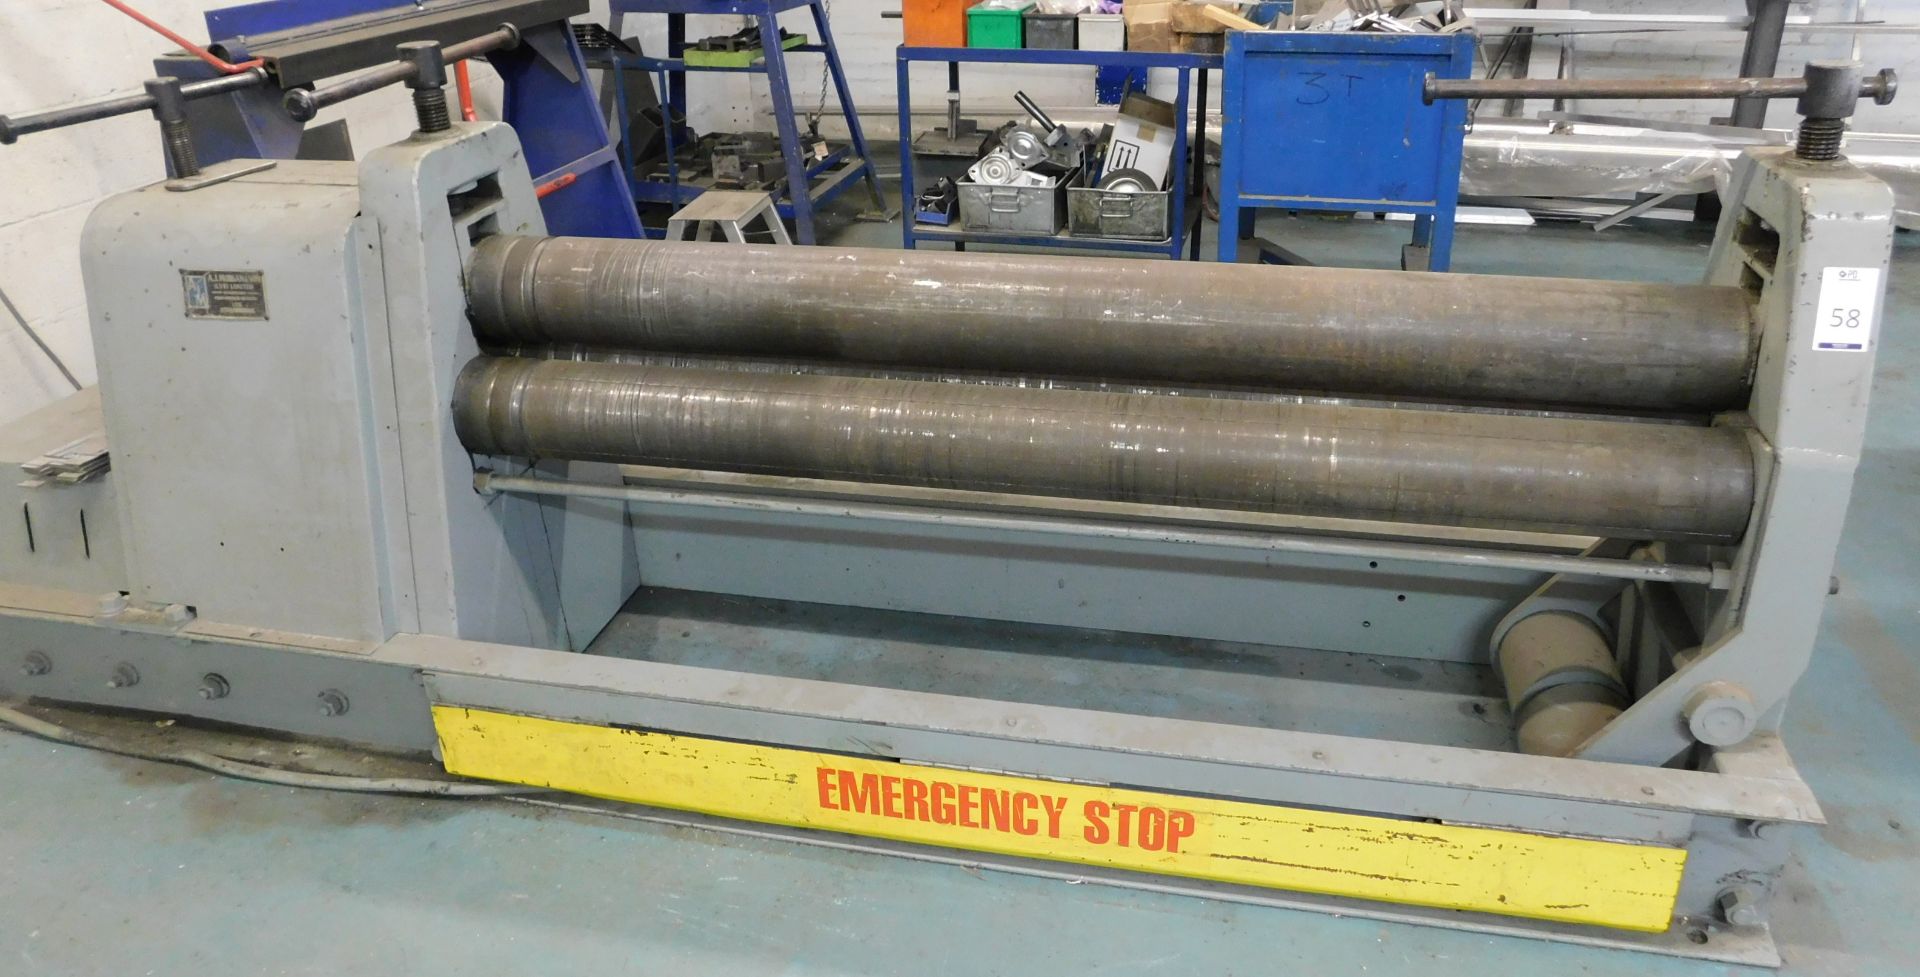 Morgan Pyramid Powered Bending Rolls, 185cm (Location: Kettering - See General Notes for Details)